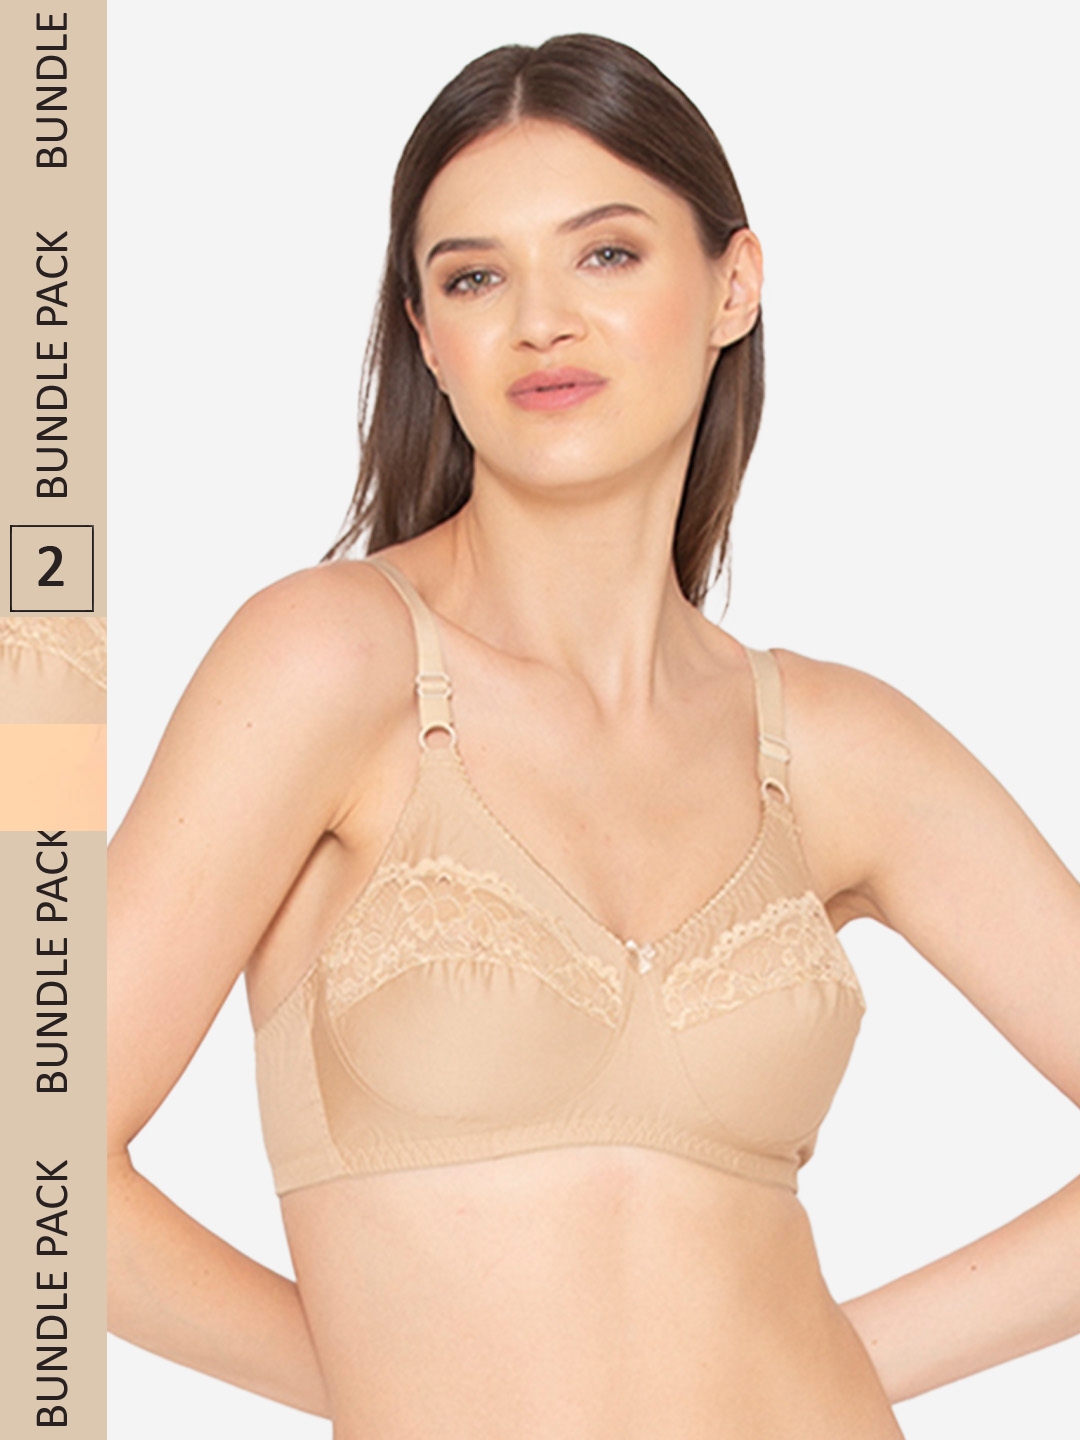 Buy Groversons Paris Beauty Women Full Coverage Everyday Lace Bra